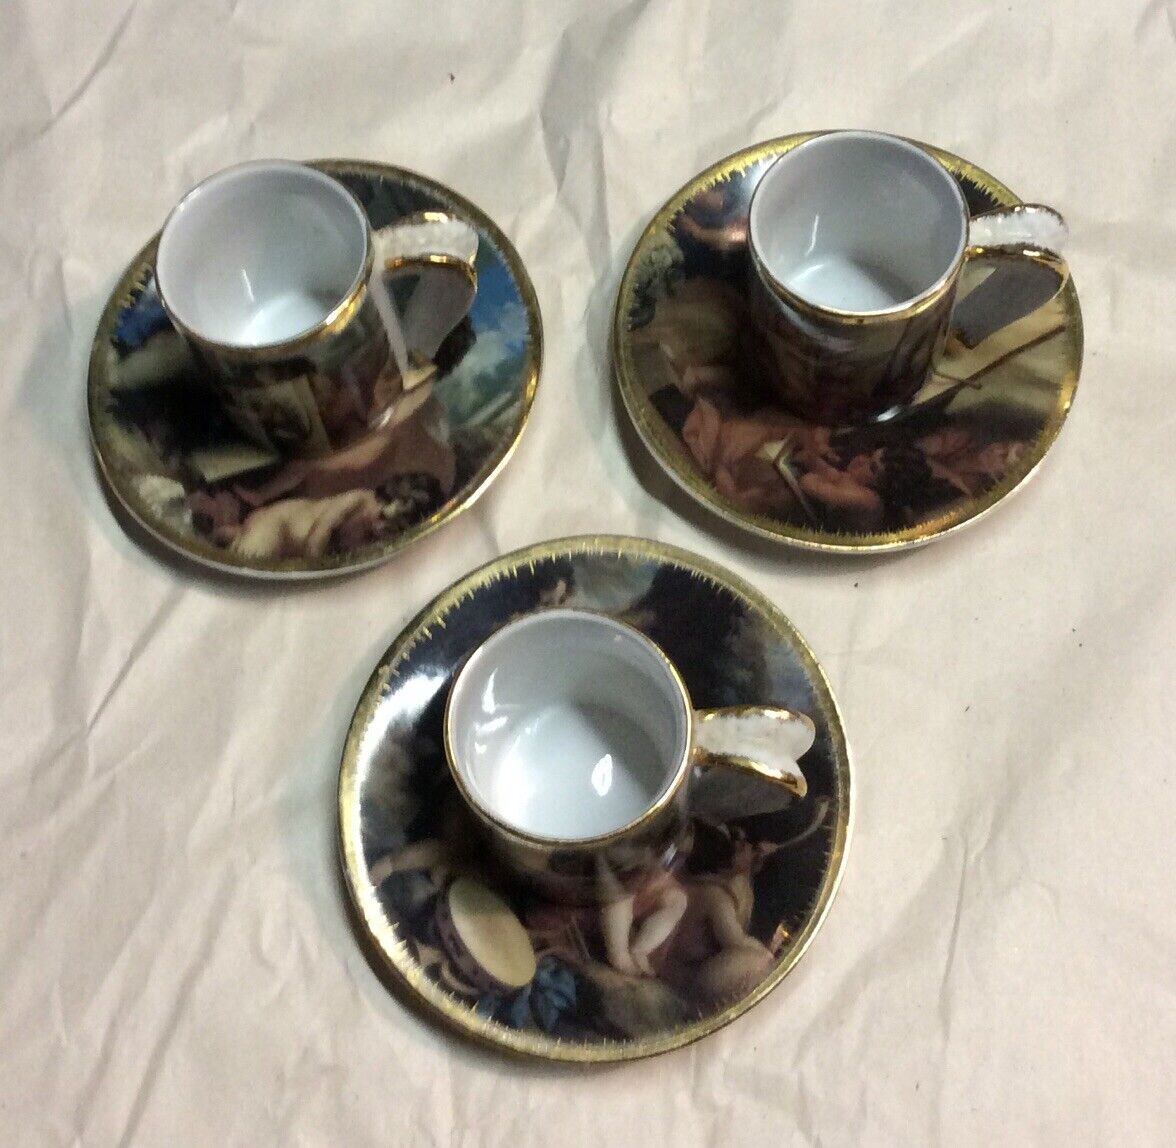 VINTAGE Formalities by Baum Bros Cup & Saucer Set of 3-multicolored